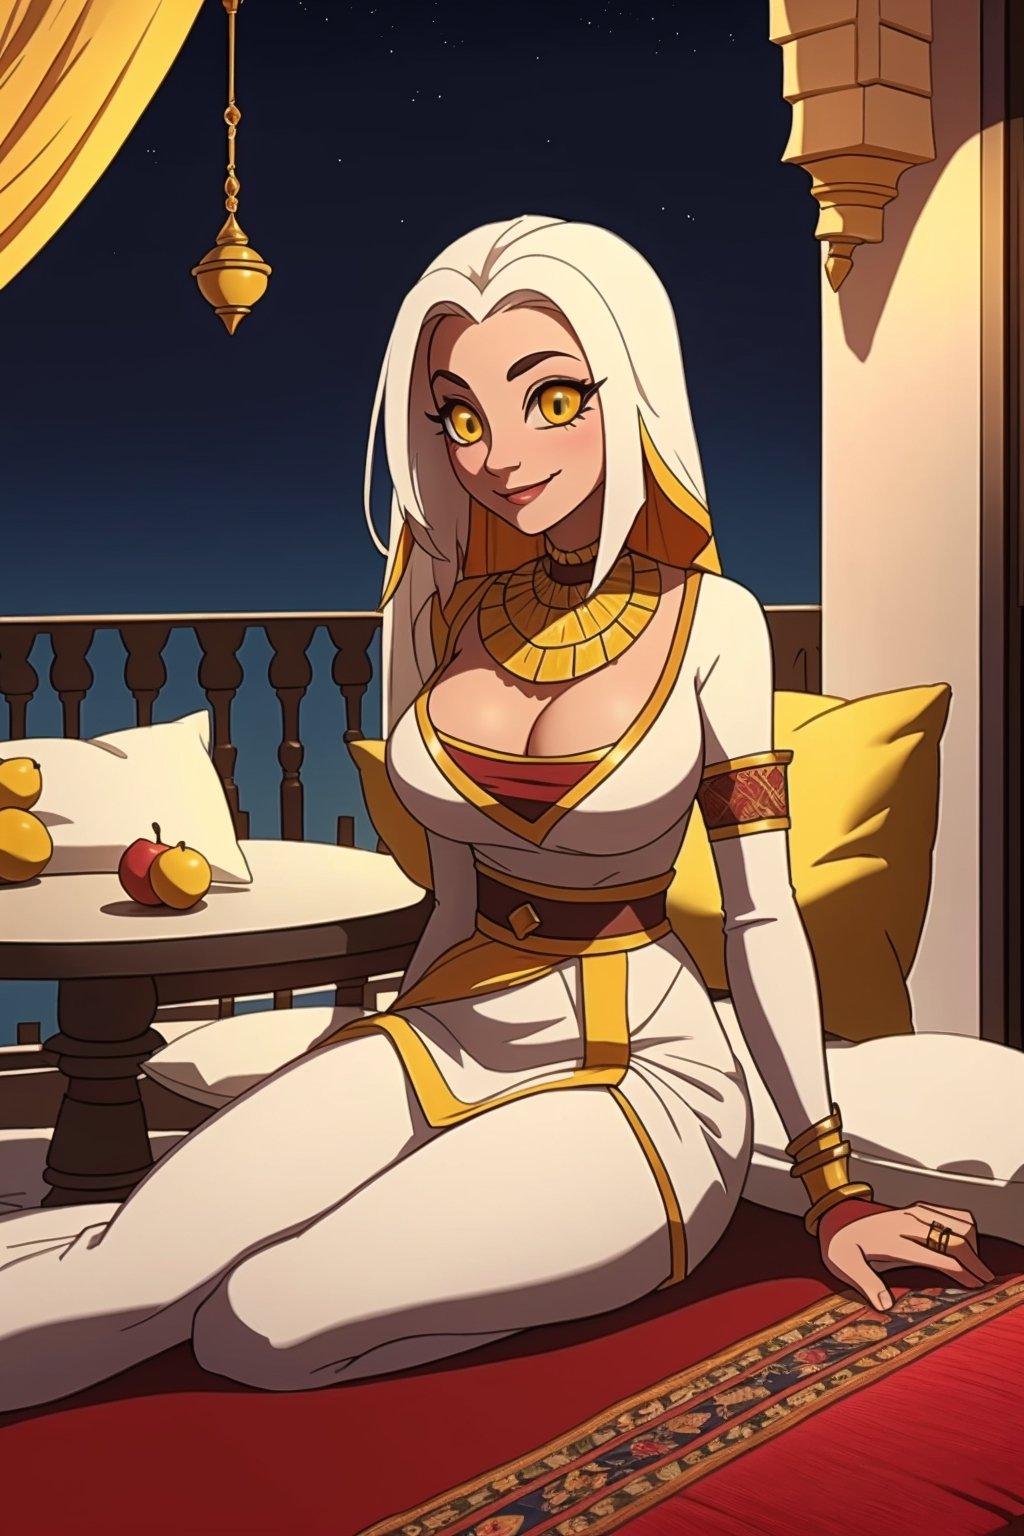 Lute\(thicc body, white hair, yellow eyes, jewelery, bridal gauntlets, rings, amulets, eyelashes, large cleavage, wearing full harem dress, sandal, feminine, beautiful, mistress\), sitting on matress, The scene should convey a seductive smile expression on her face, with an air of cuteness as she maintains eye contact with the viewer, background(luxurious arabian balcony, pillows, sky, night, table(fruits)),(masterpiece, highres, high quality:1.2), ambient occlusion, low saturation, High detailed, Detailedface,Lut